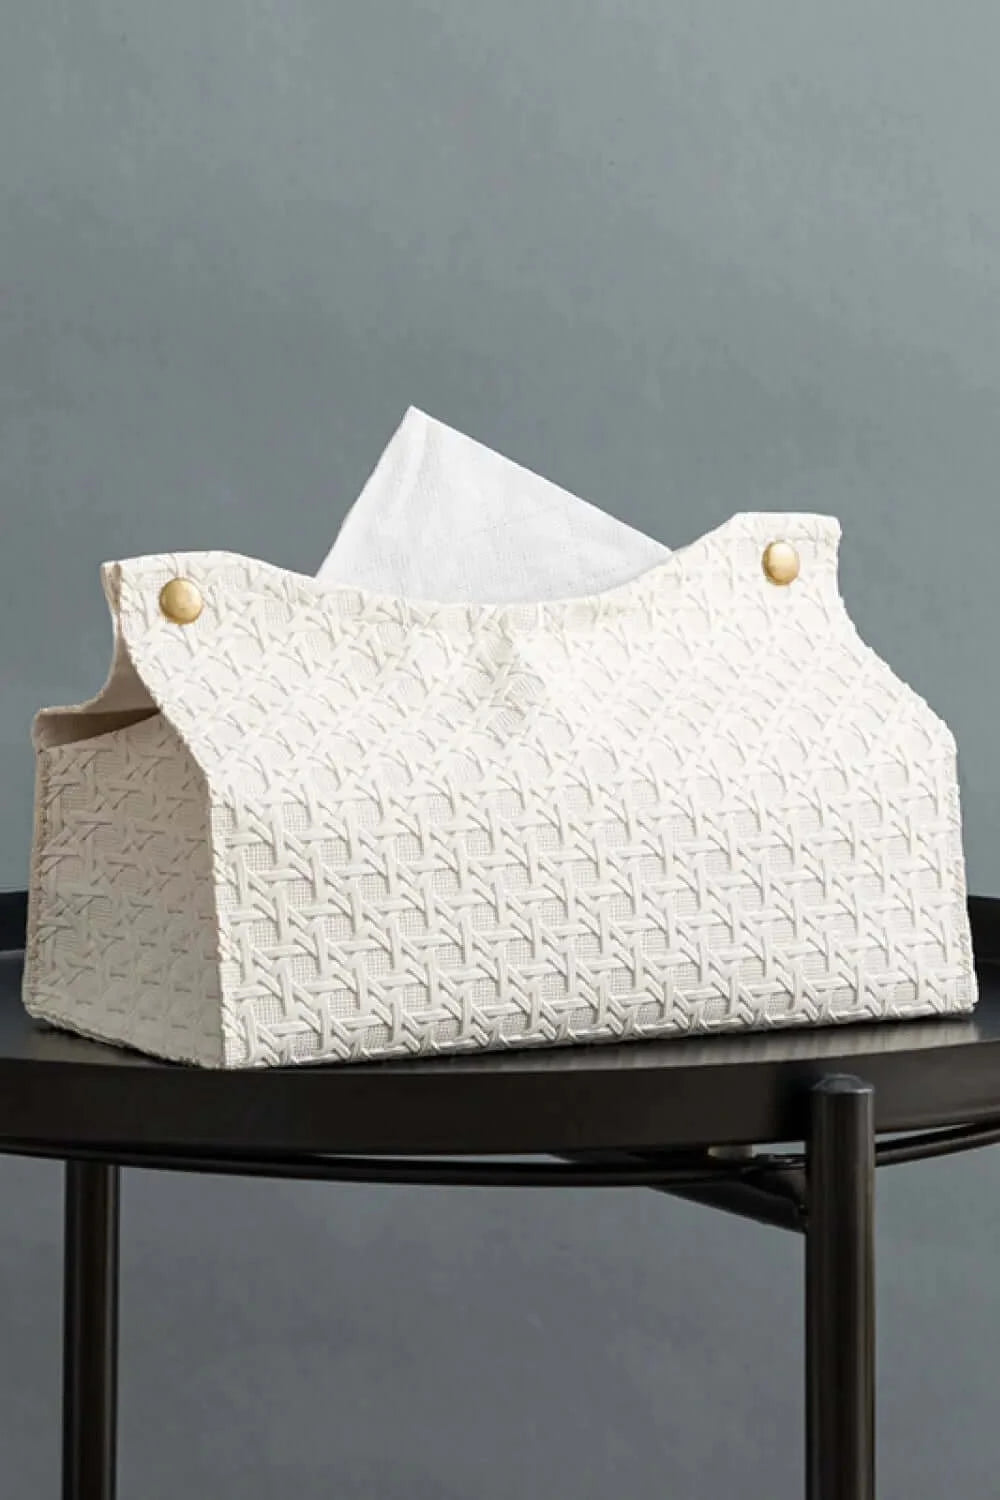 2-Pack Woven Tissue Box Covers - Unystar2-Pack Woven Tissue Box Covers